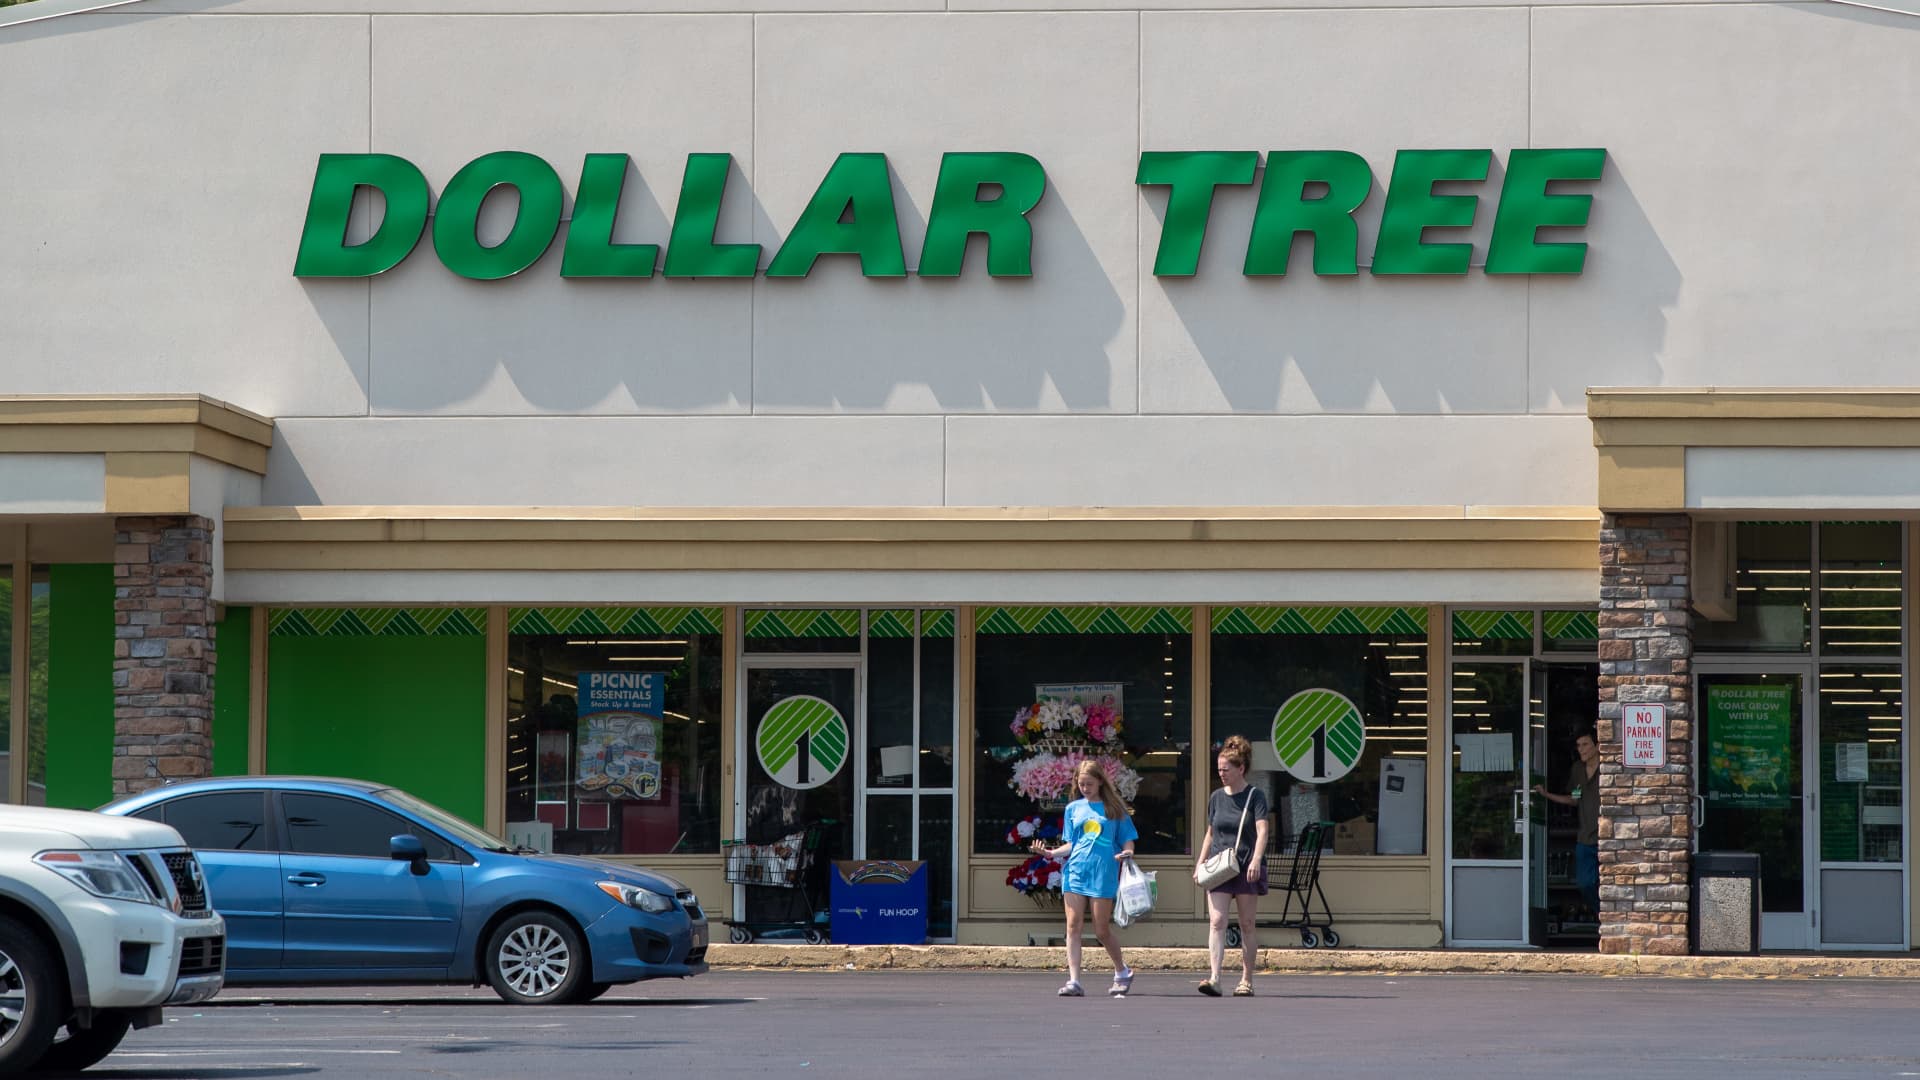 Dollar Tree's shares sink 13%, as CEO says 'challenging' economy is pressuring discounter